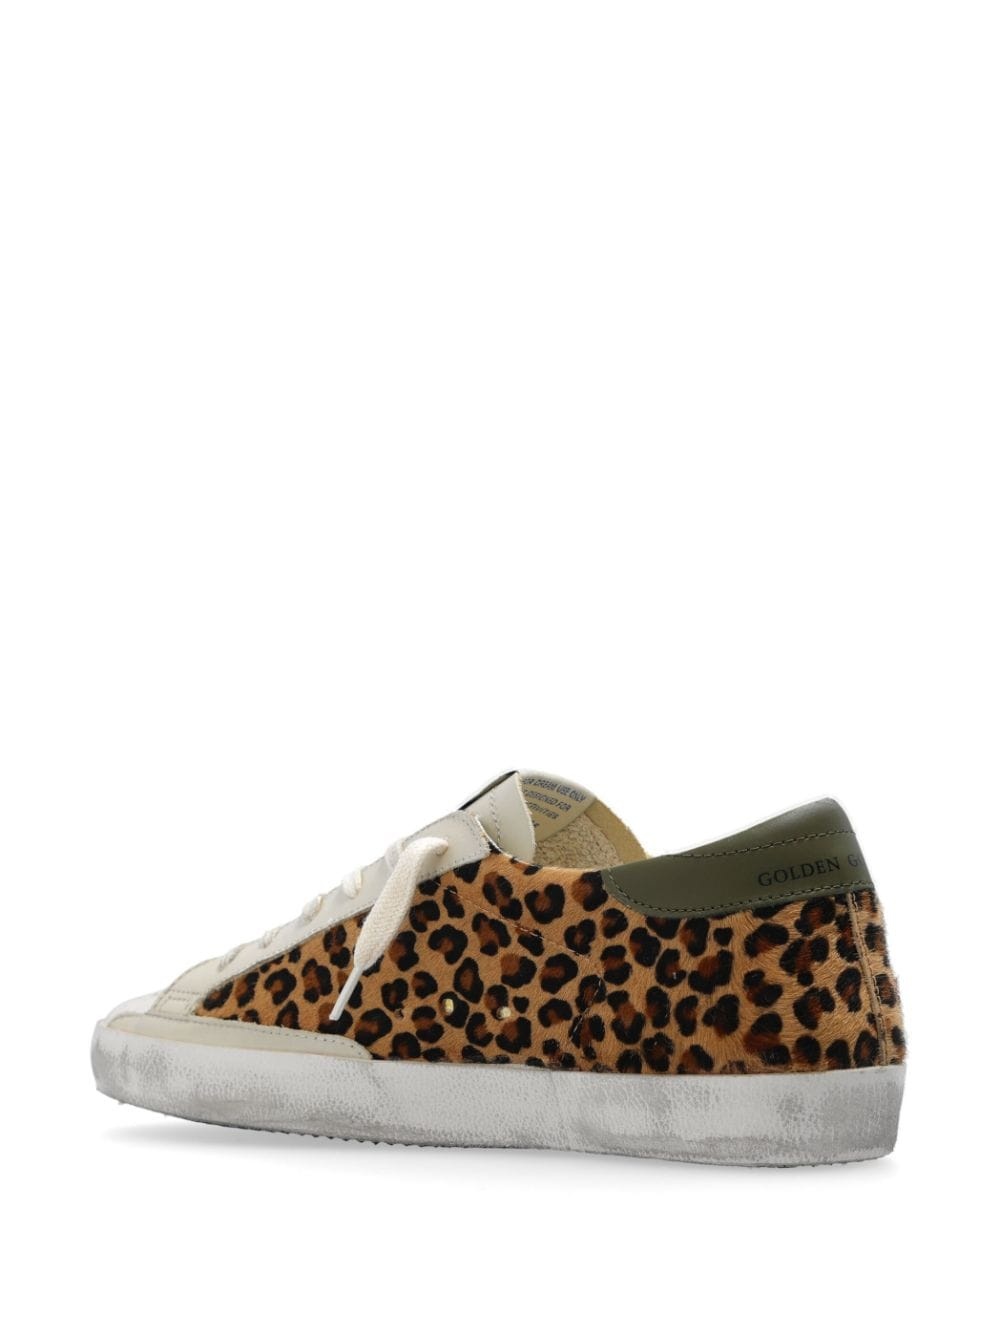 Golden Goose Super Star Leather Sneakers - 4